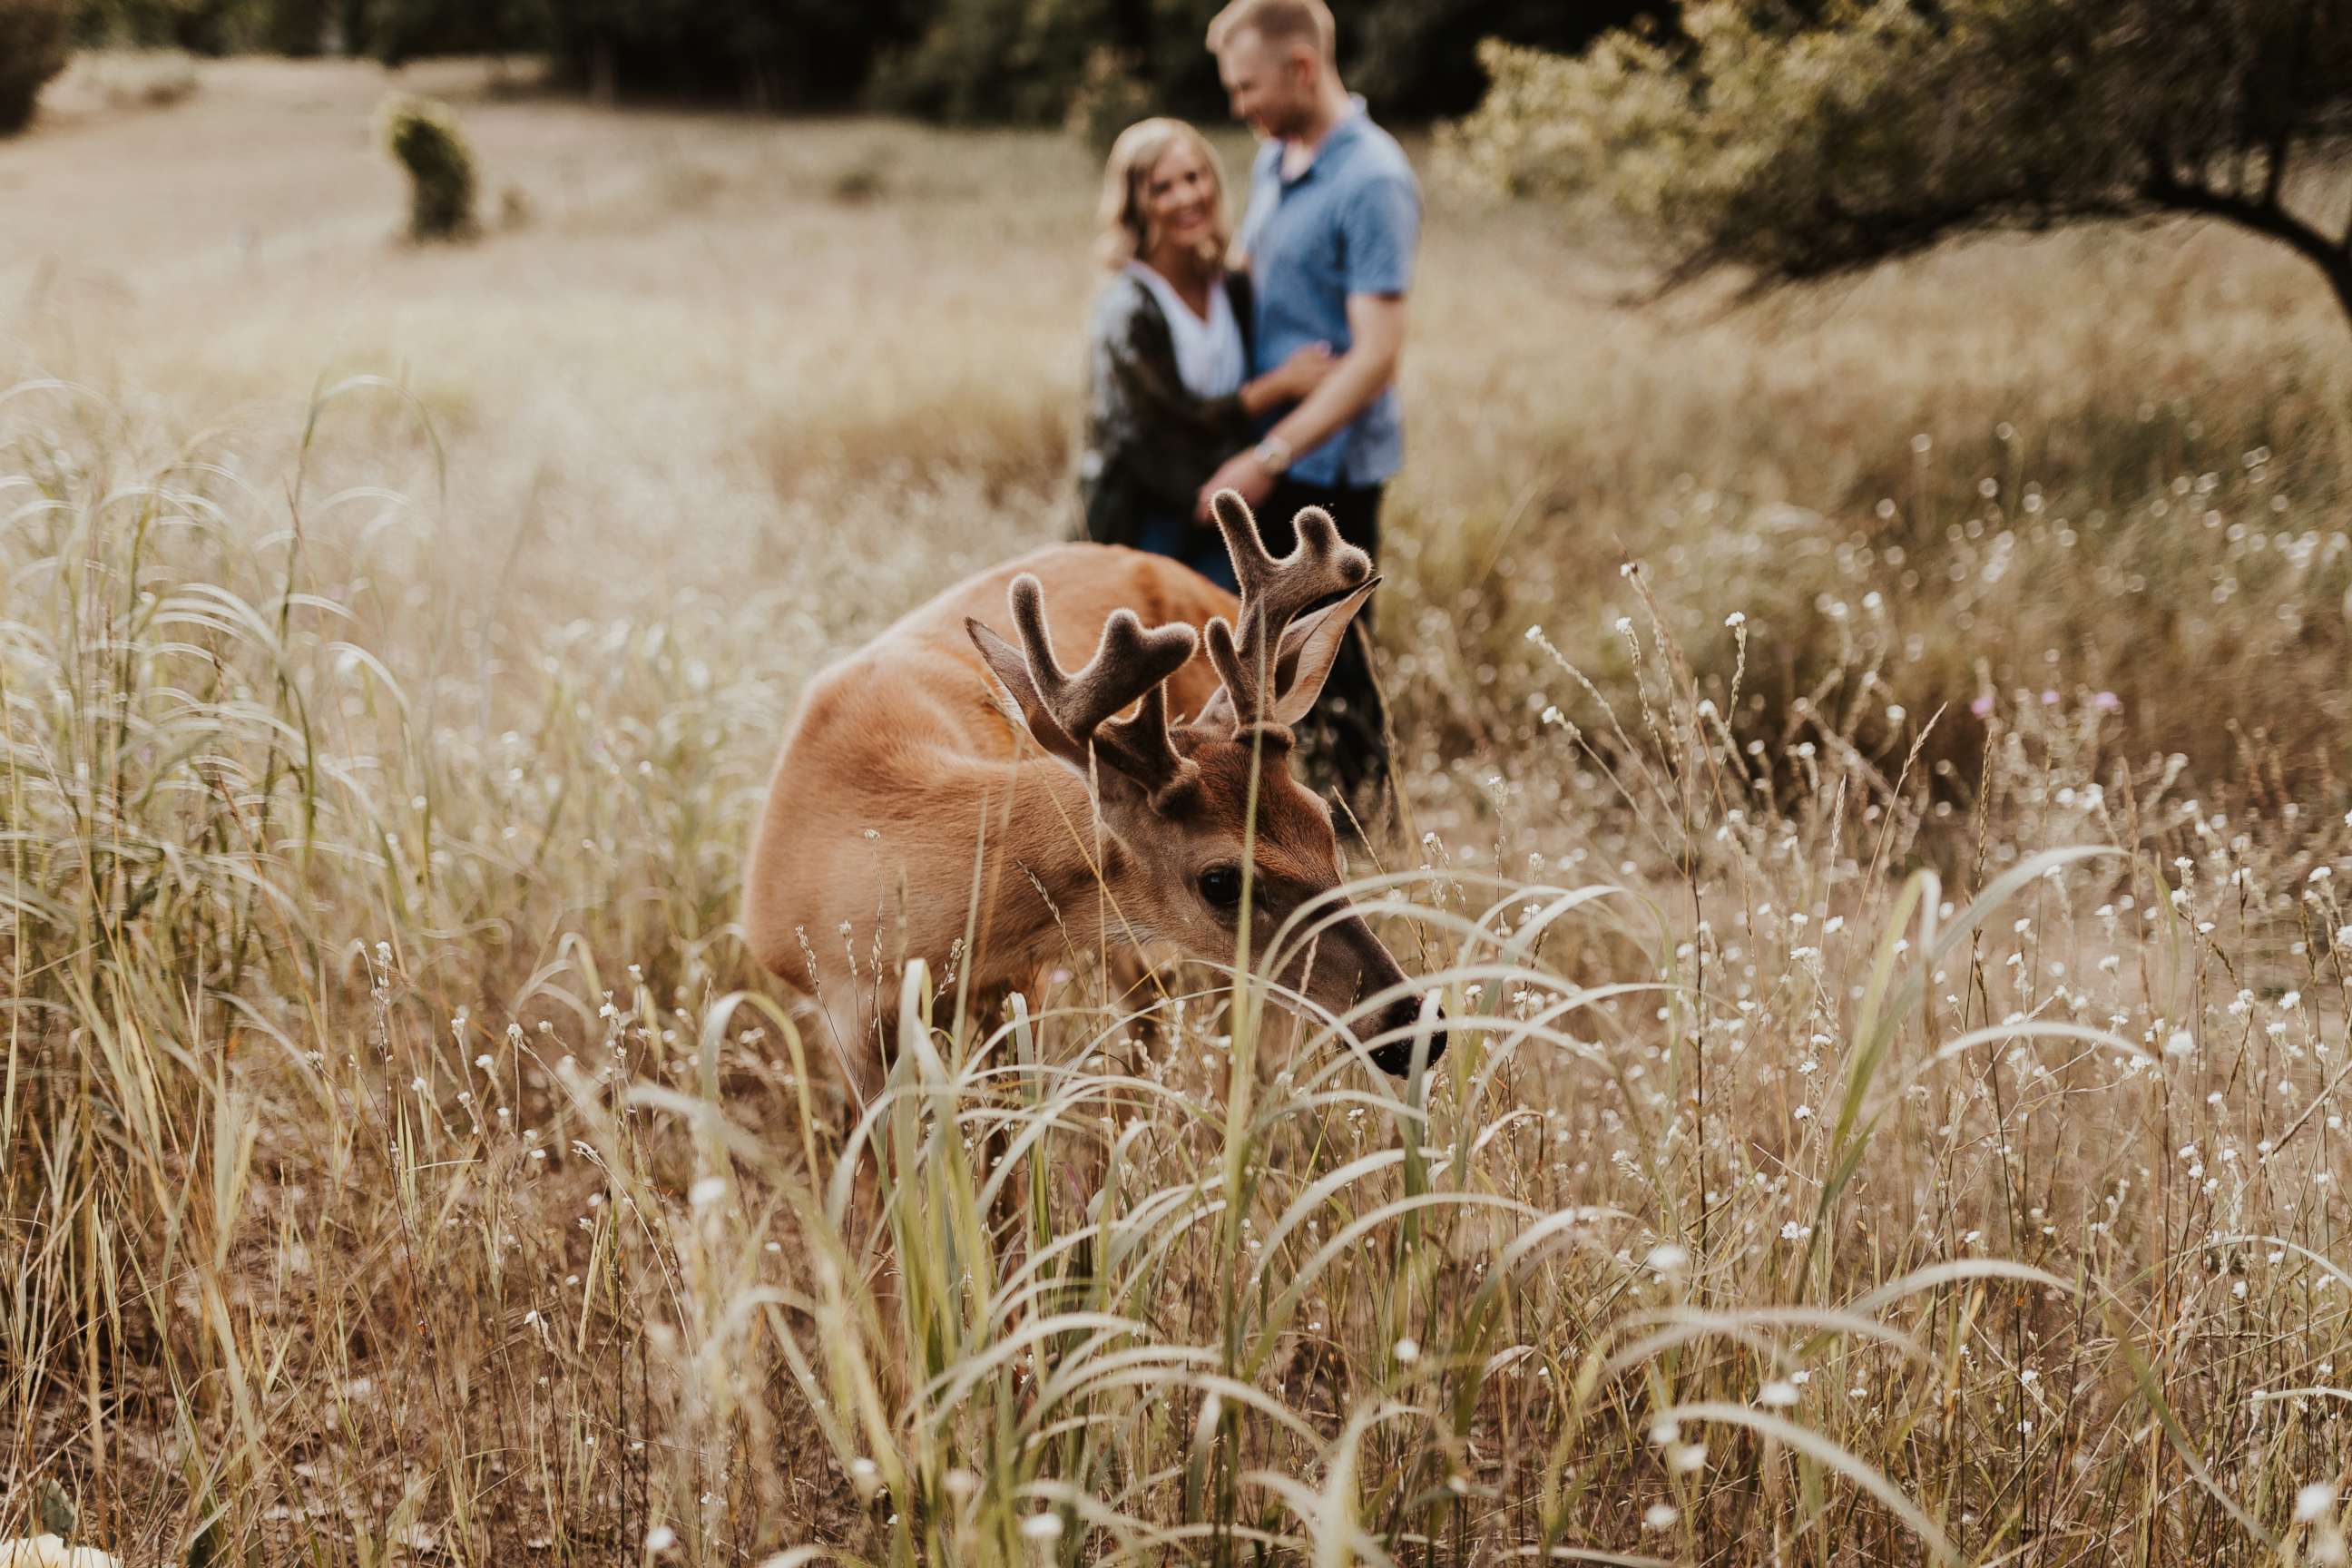 PHOTO: "We asked for 'naturey' and 'woodsy,' and holy cow that delivered," Dori Castignola said of the deer that visited her and fiancee Austin Swiercz's photo shoot.